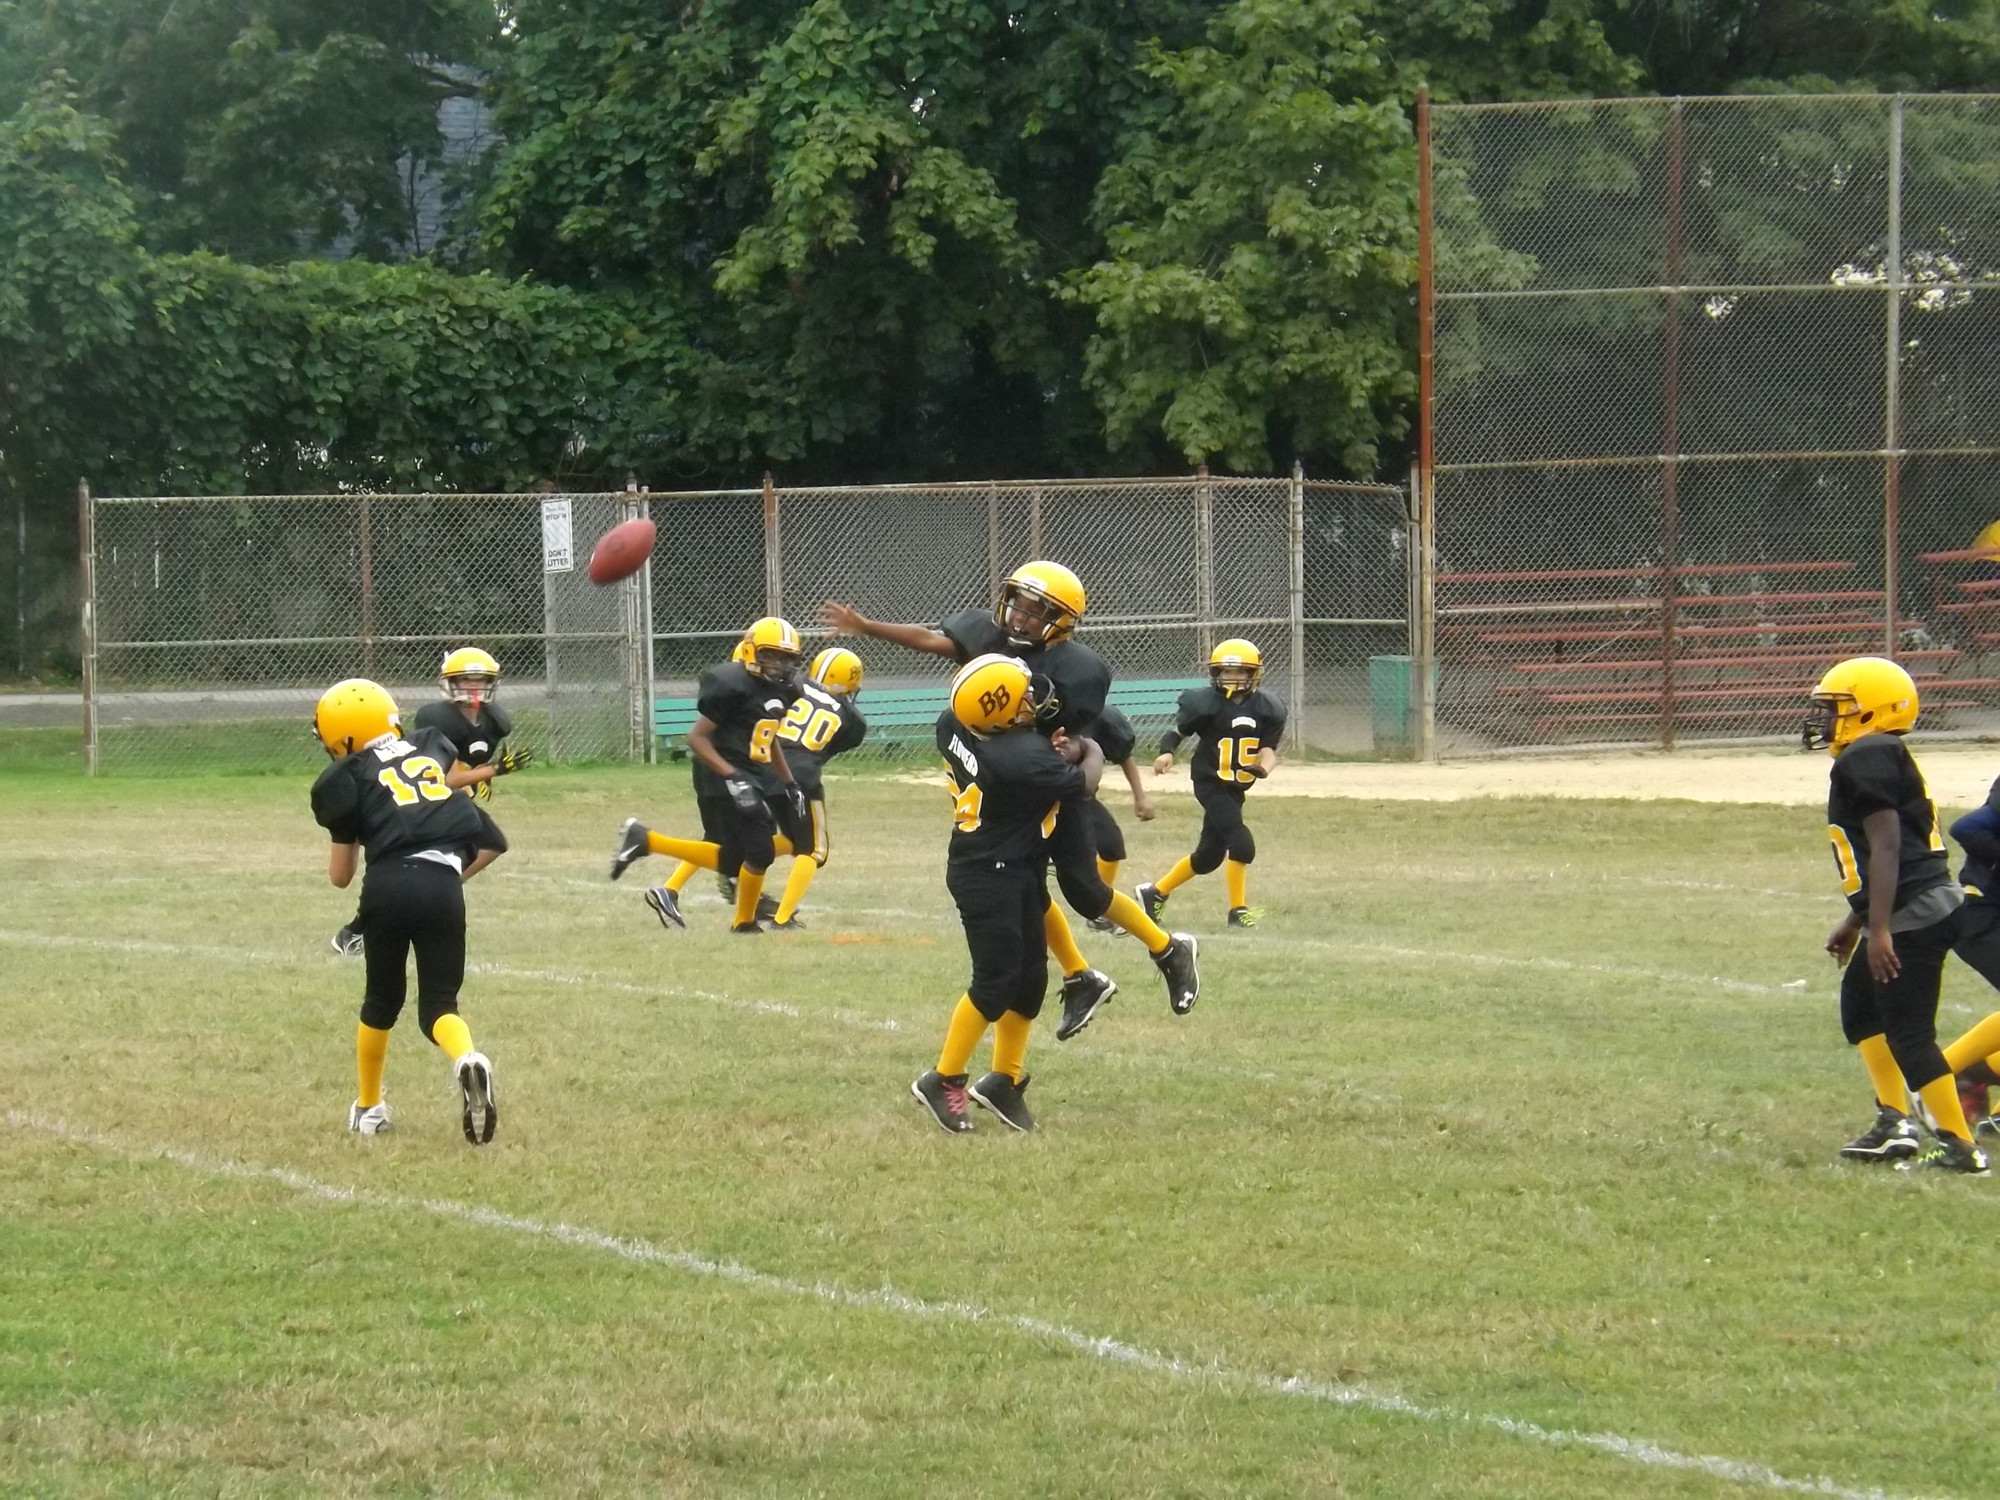 The Baldwin Bombers ran short practices on Sept. 13, the day before their regular season kicked off.